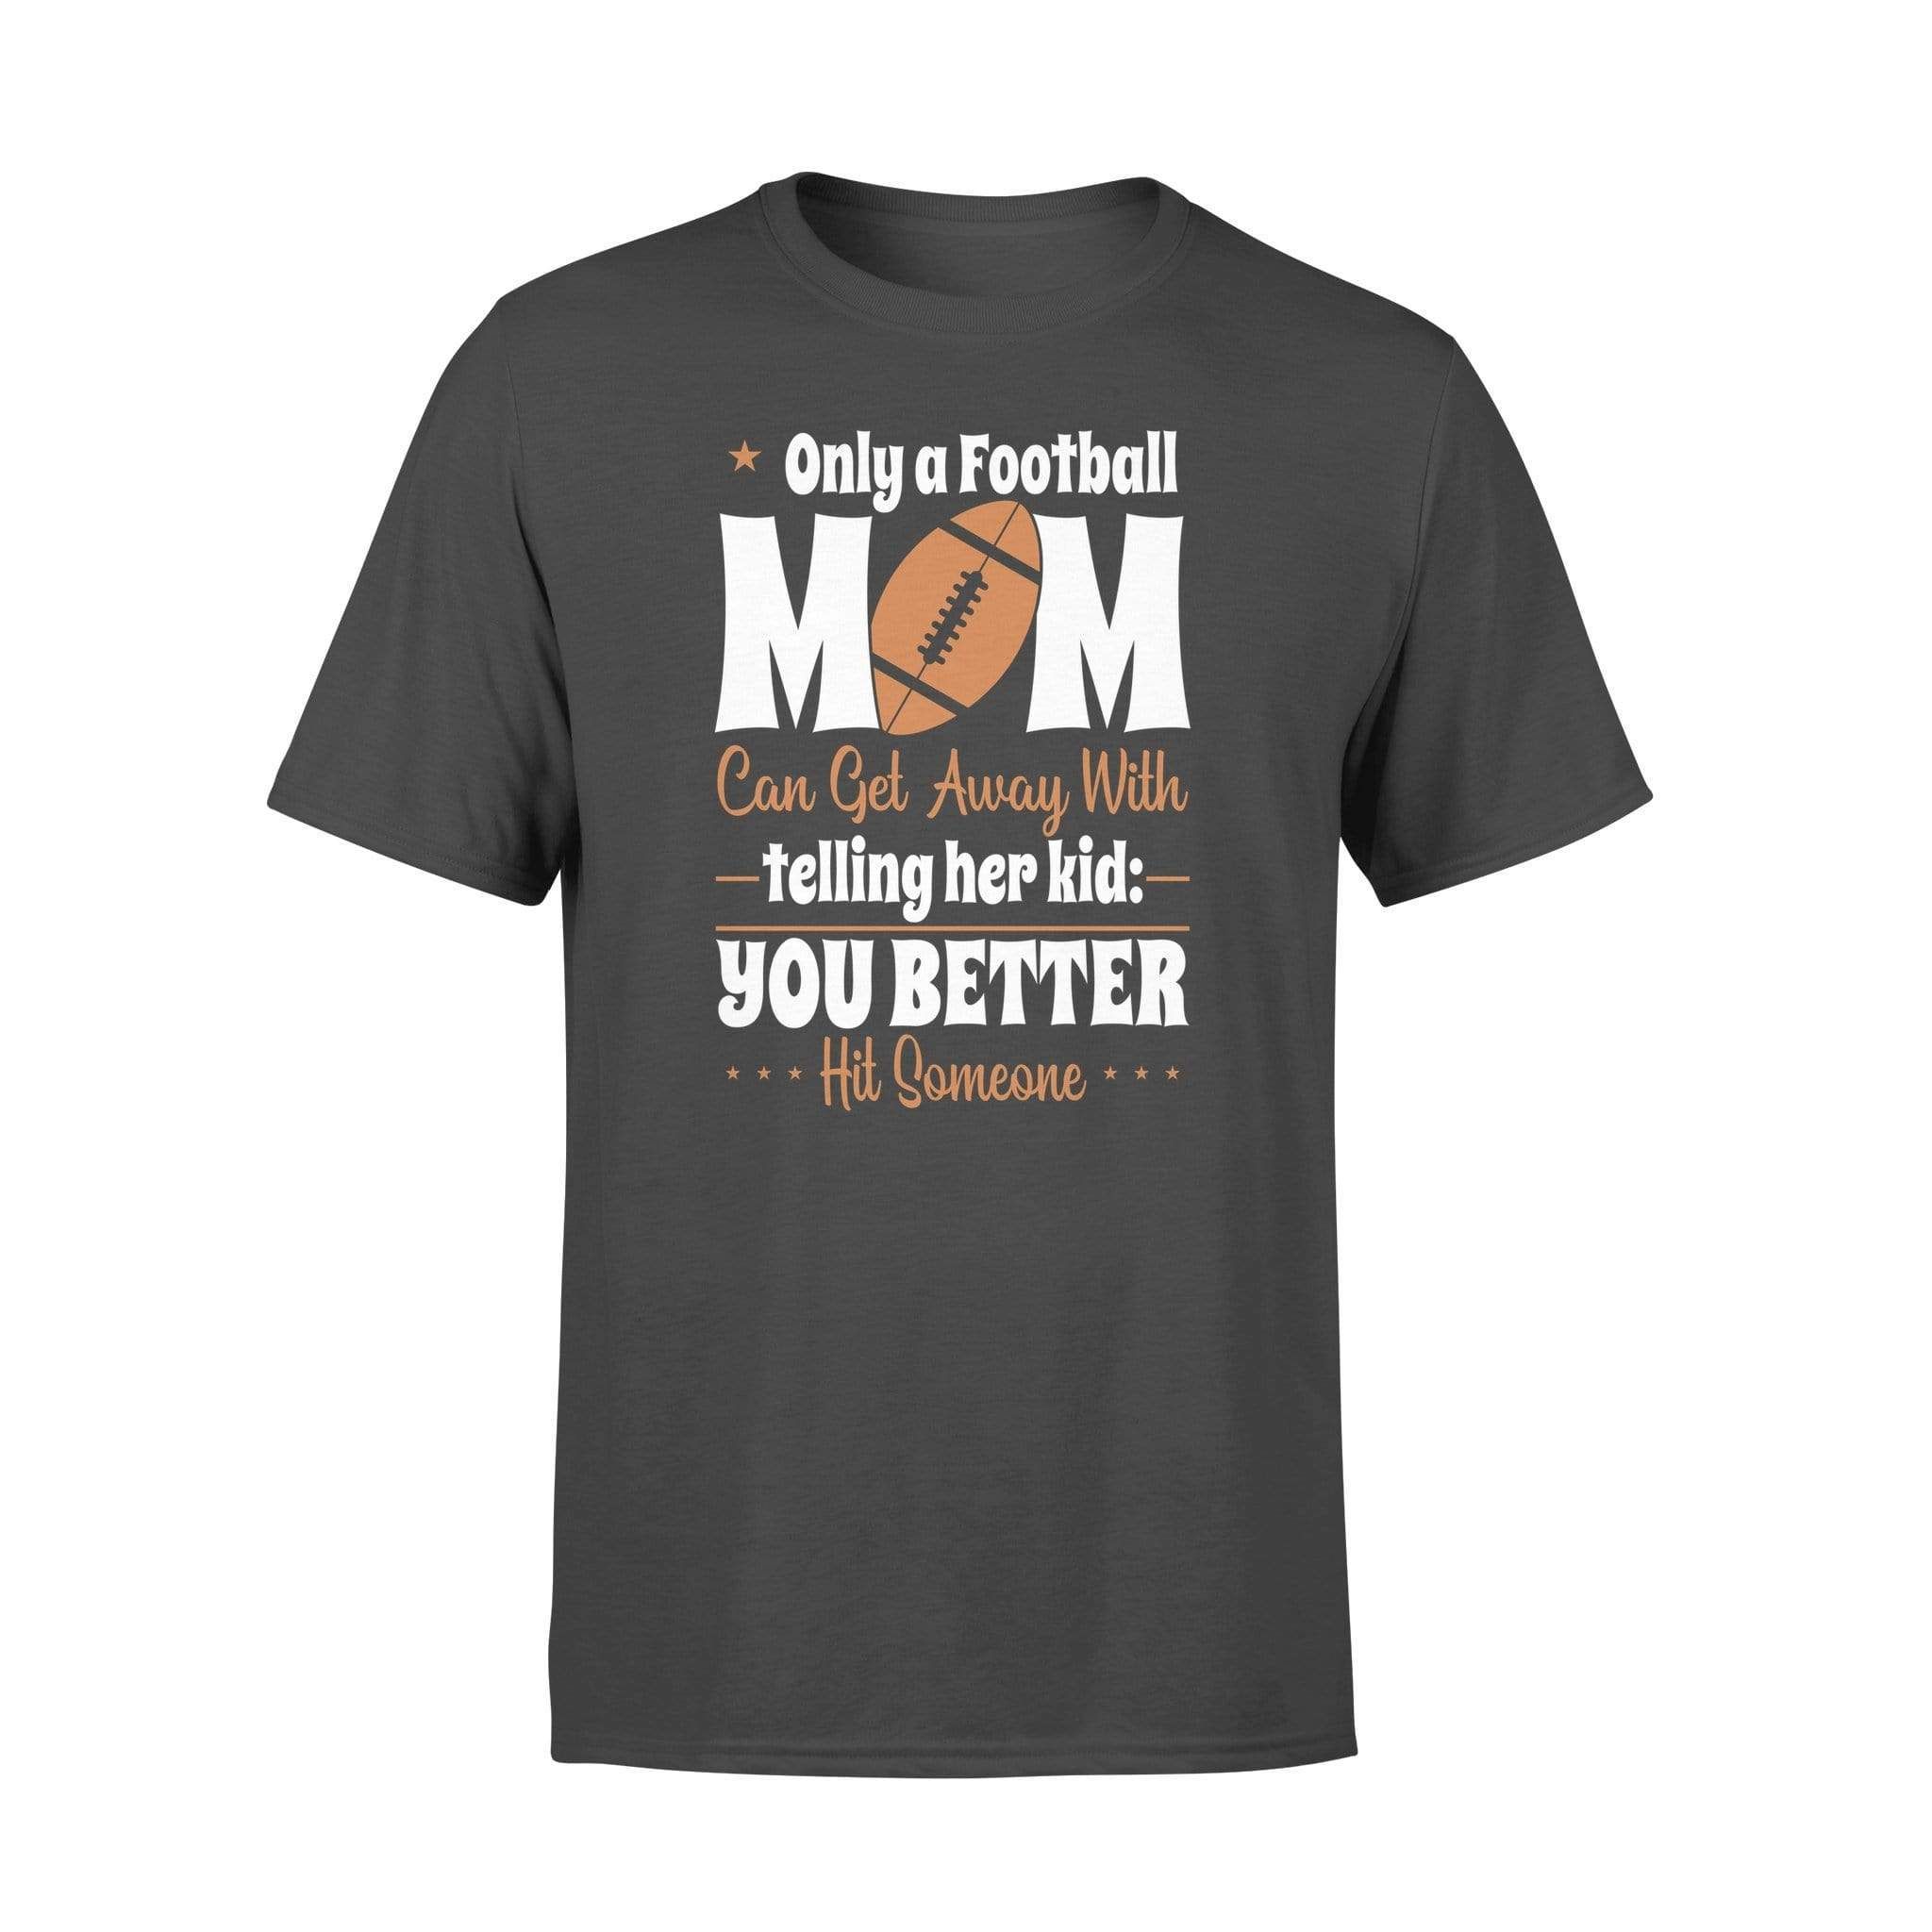 T Shirts Football You Better Hit Someone